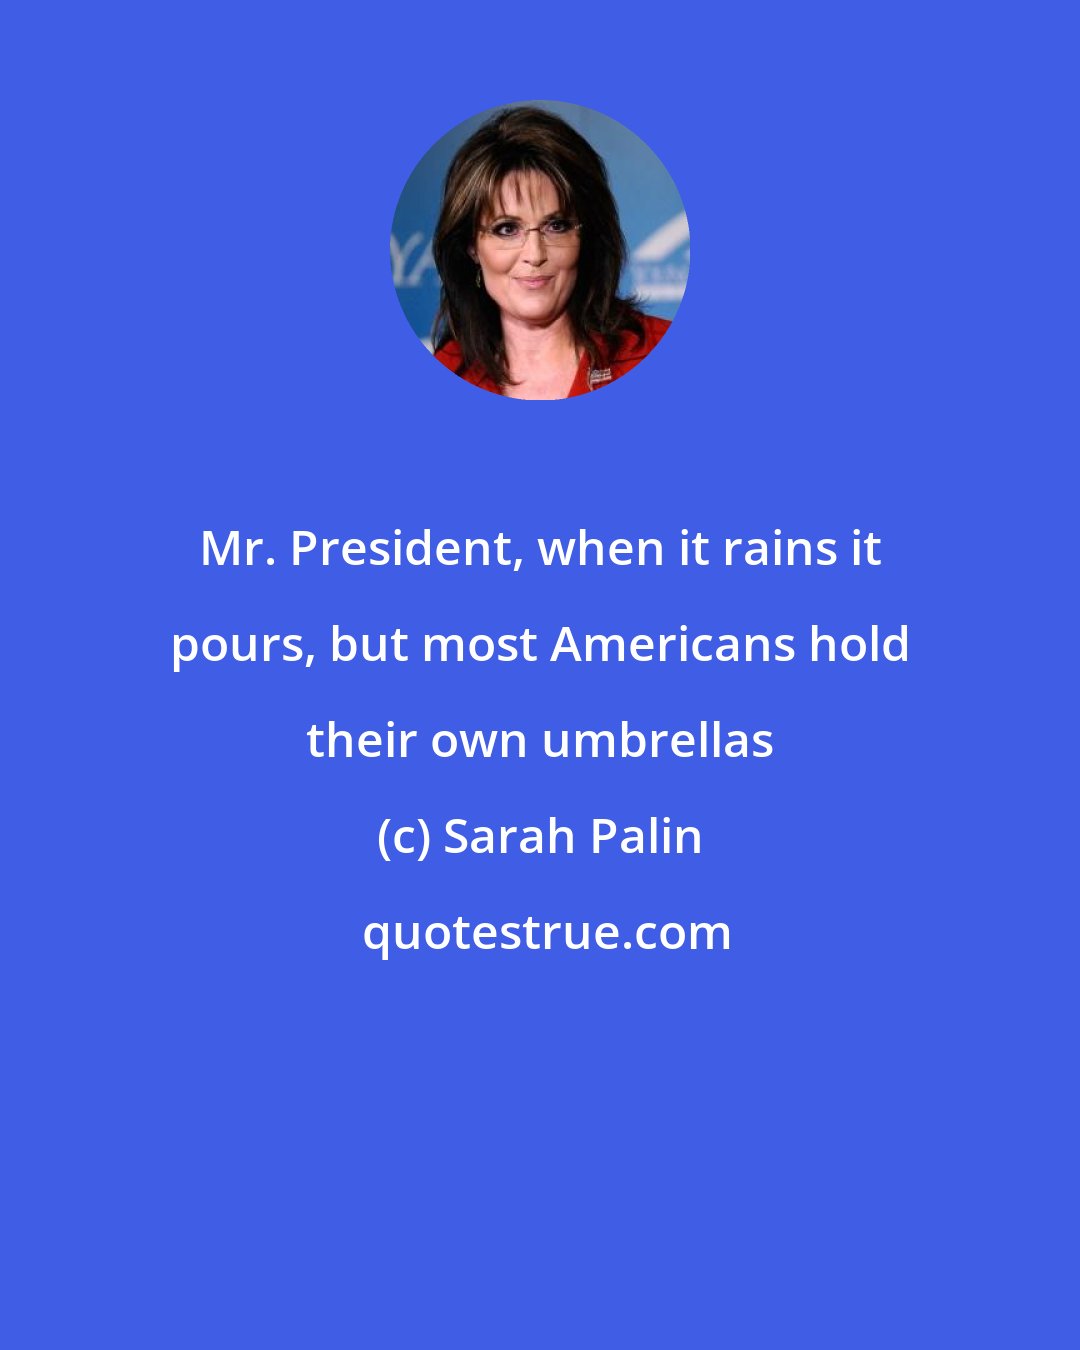 Sarah Palin: Mr. President, when it rains it pours, but most Americans hold their own umbrellas